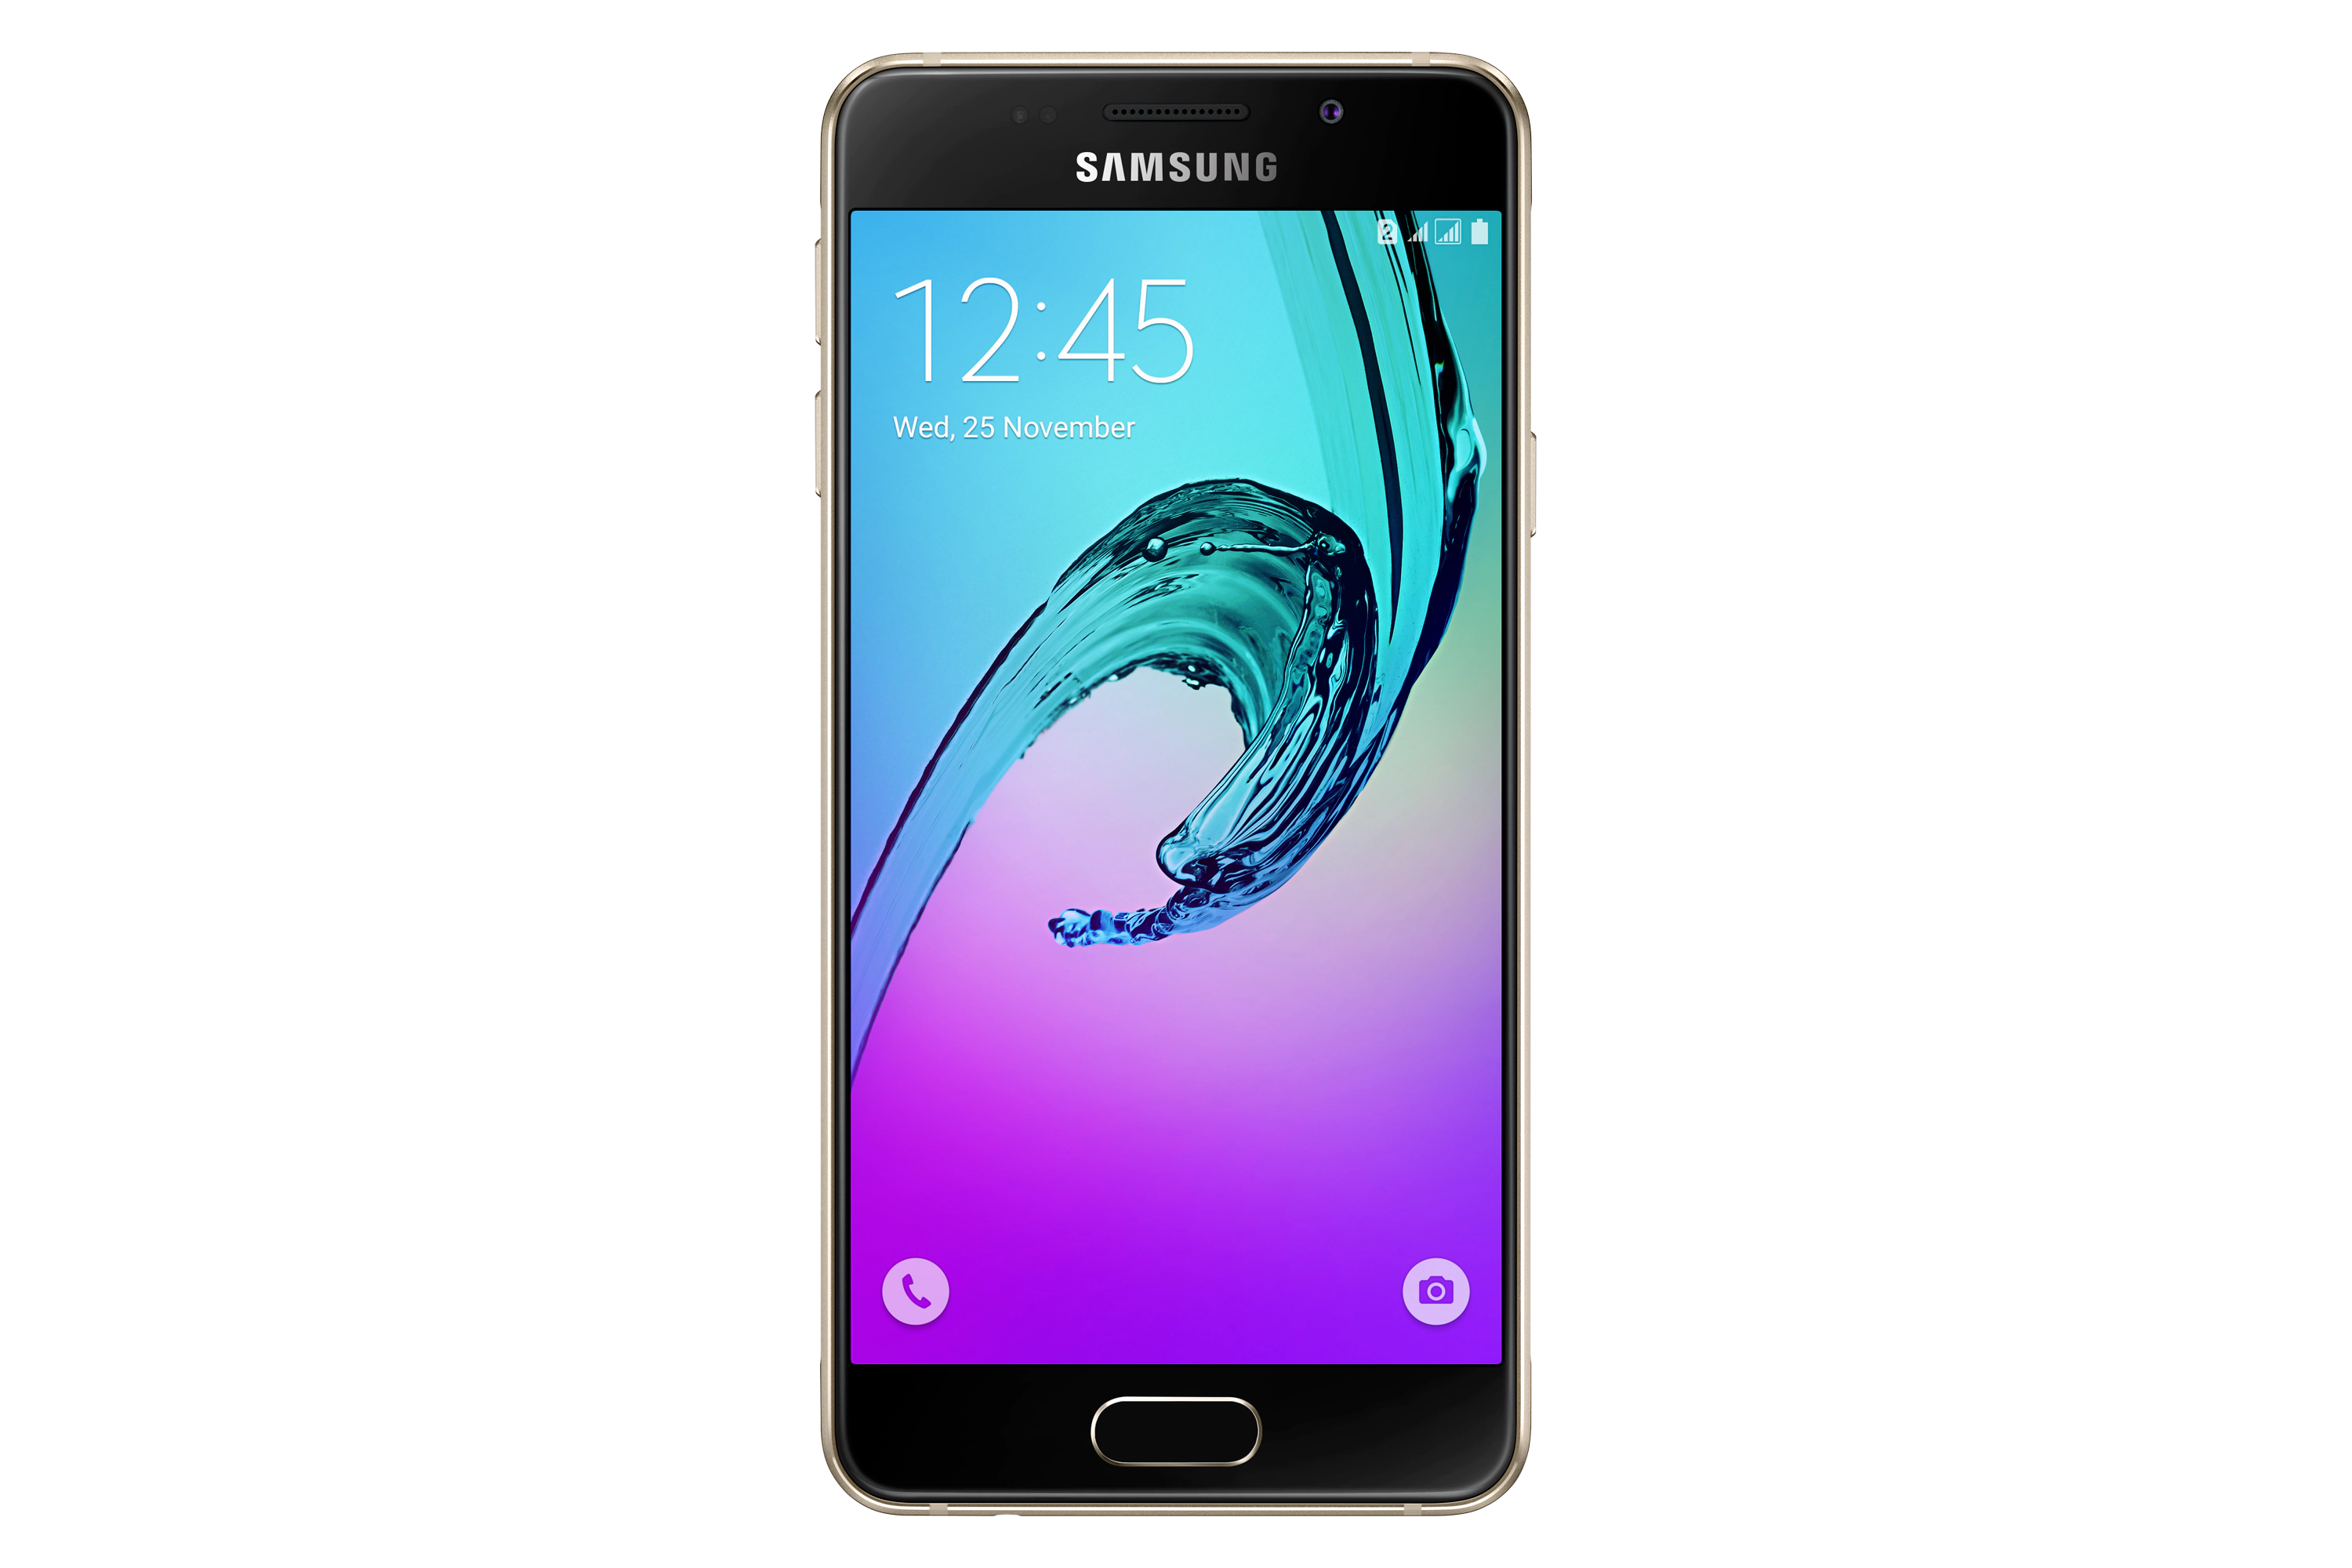 [Troubleshooting Guide] What to do if your Samsung Galaxy A3 (2016) continues rebooting on its own after the rooting method